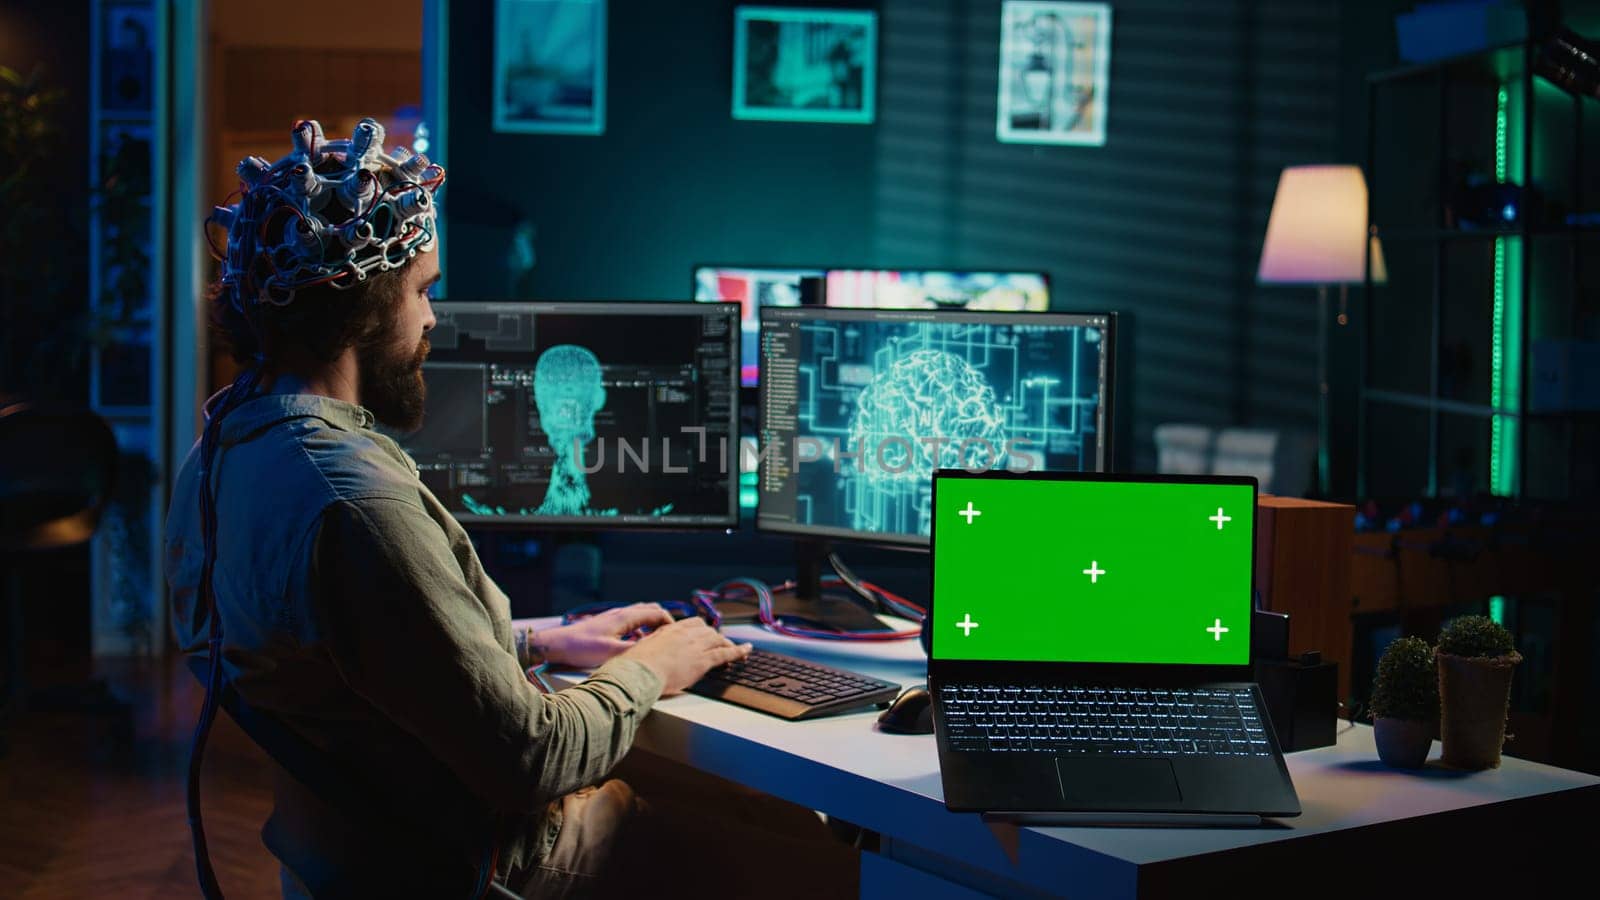 Engineer with EEG headset on merging with AI, green screen laptop by DCStudio